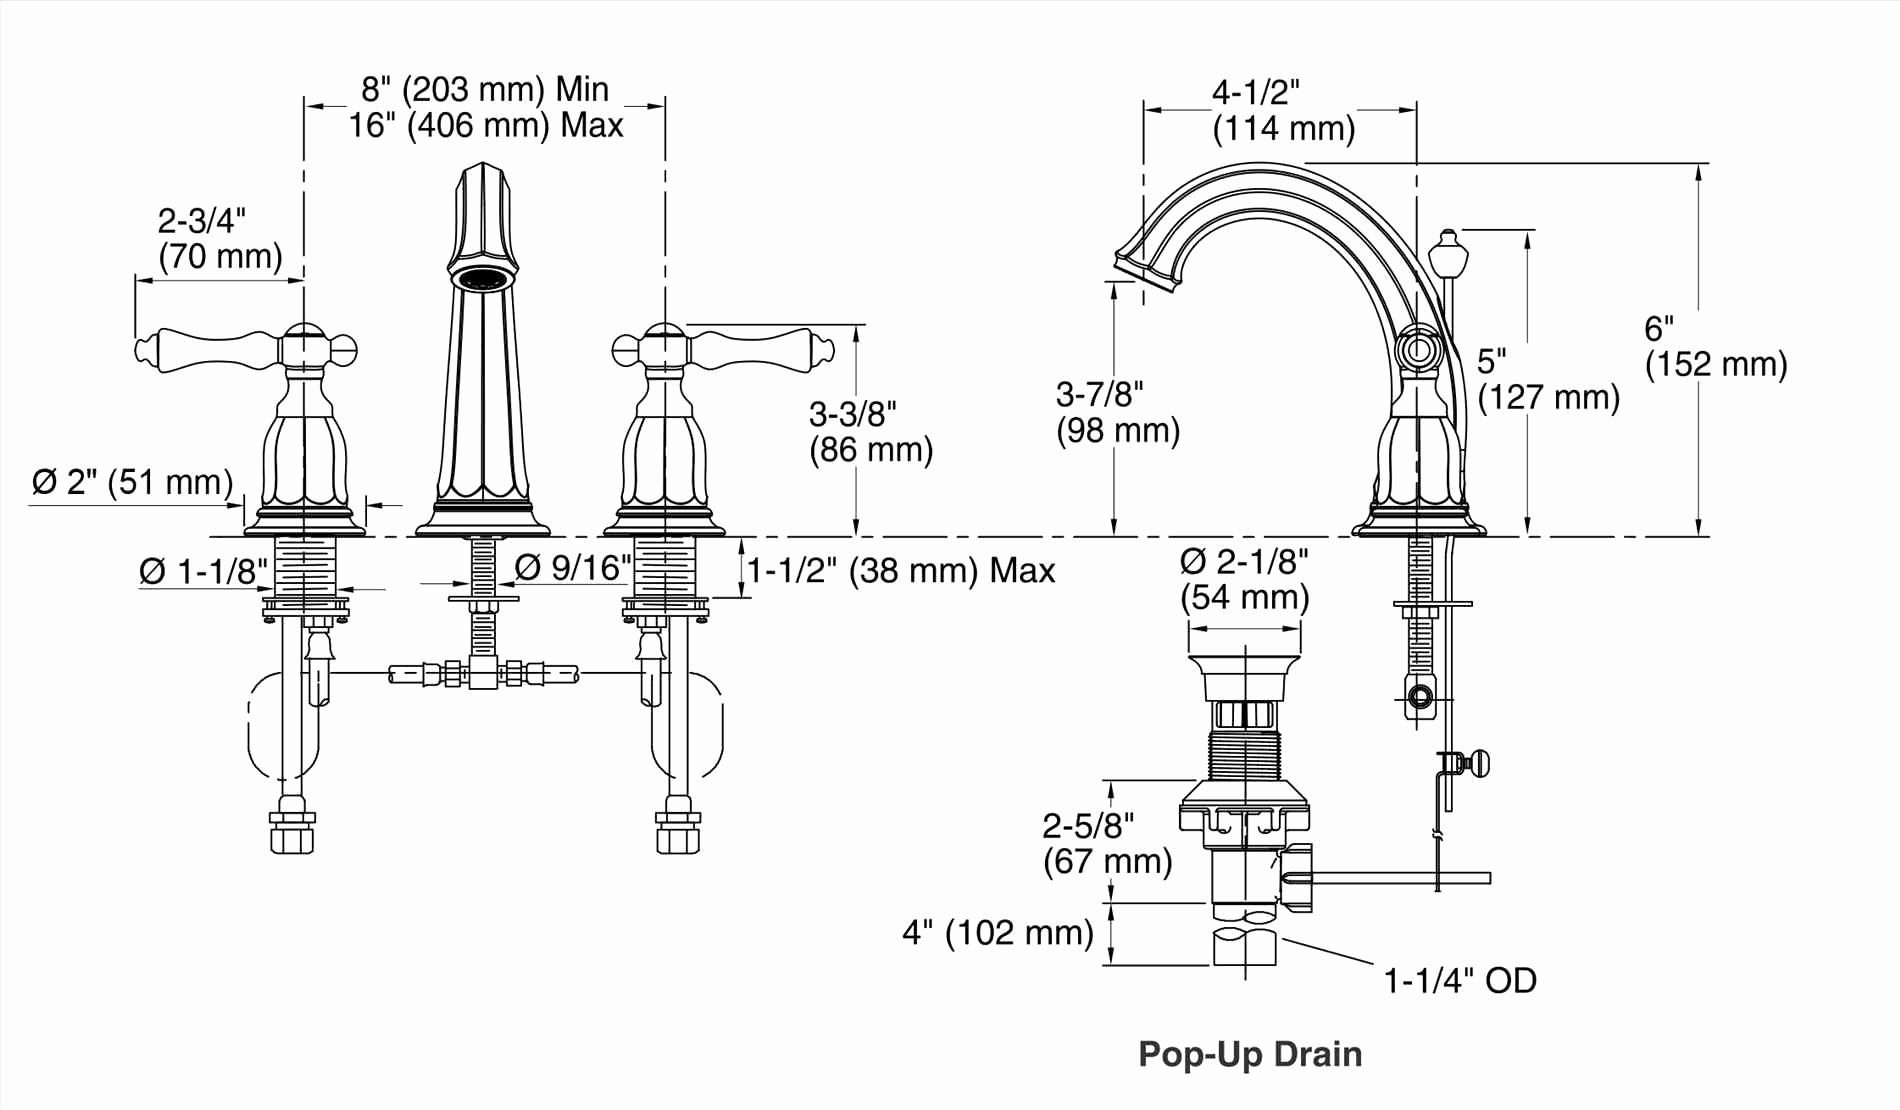 Grohe Faucet Parts Diagram 15 Awesome Grohe Kitchen Sink Faucet Replacement Parts Pics Of Grohe Faucet Parts Diagram